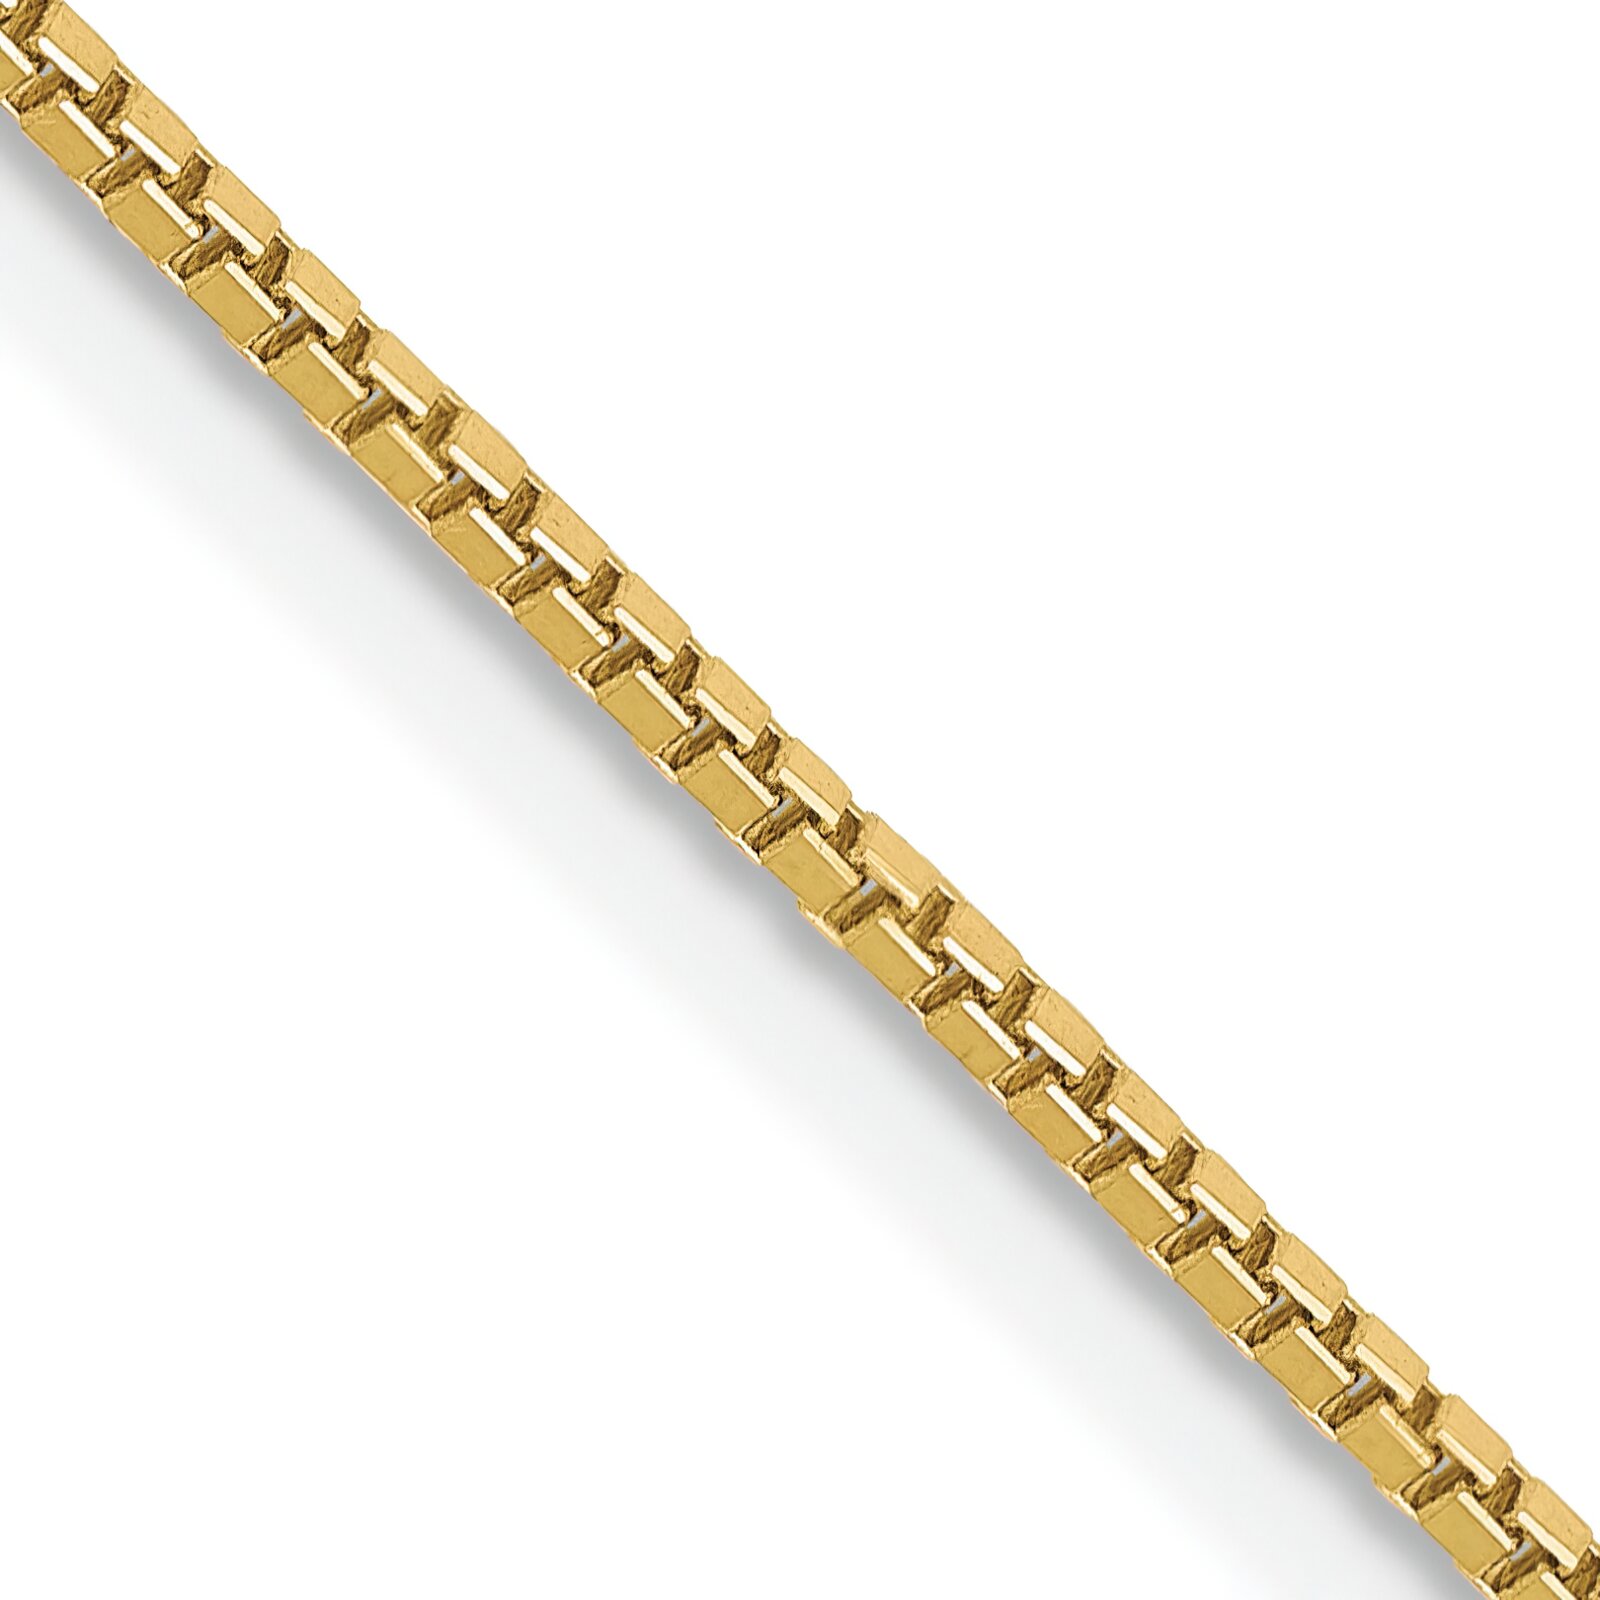 Findingking 10K Yellow Gold 1mm Box Chain Necklace Jewelry 22"